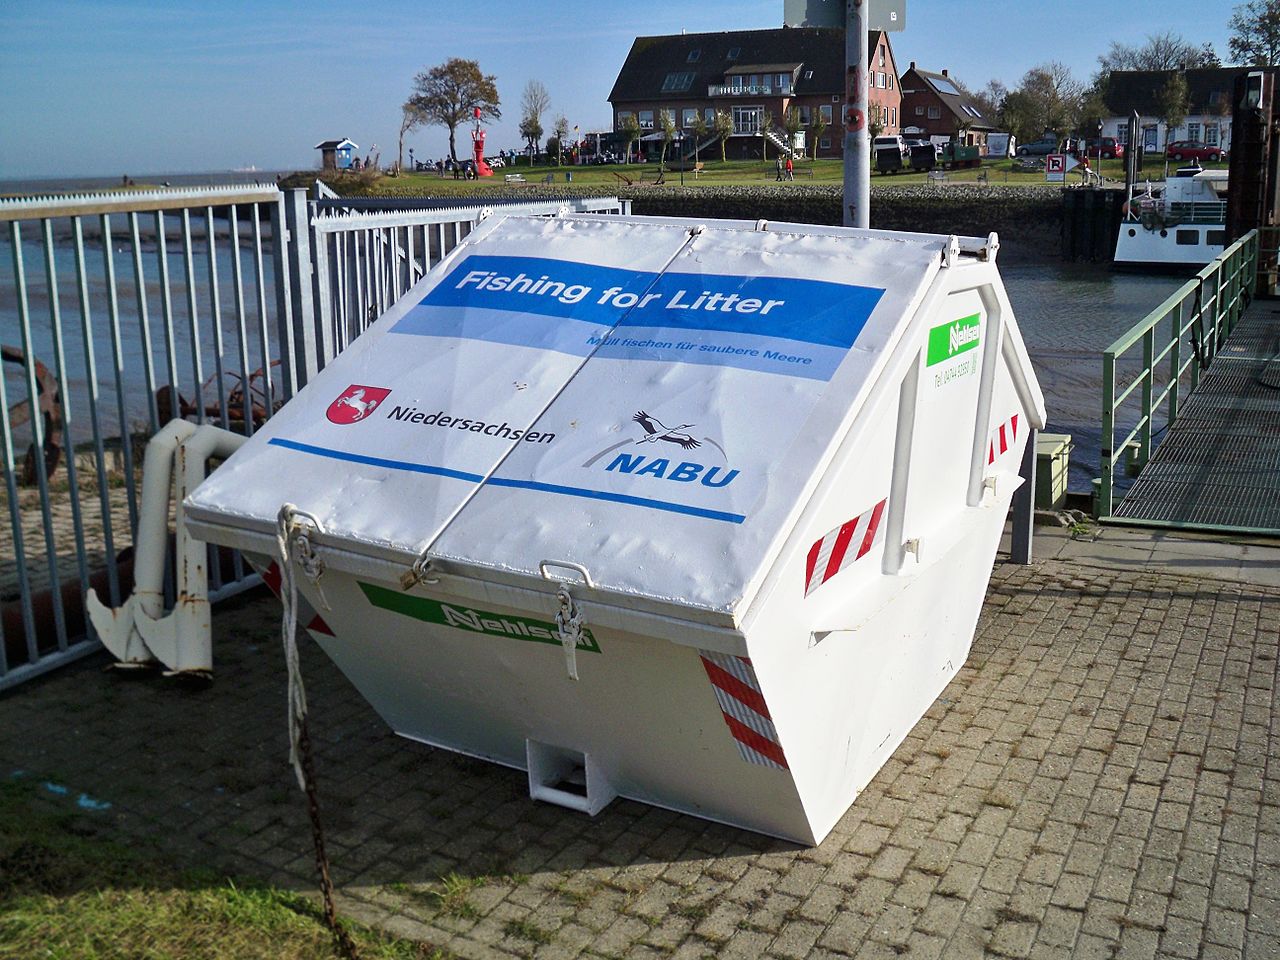 Subsequently, the fished wastes are examined on recyclability and composition. Based on the results, effective strategies for the prevention of marine waste can be developed. Photo: Ein Dahme Creative Commons Attribution-Share Alike 4.0